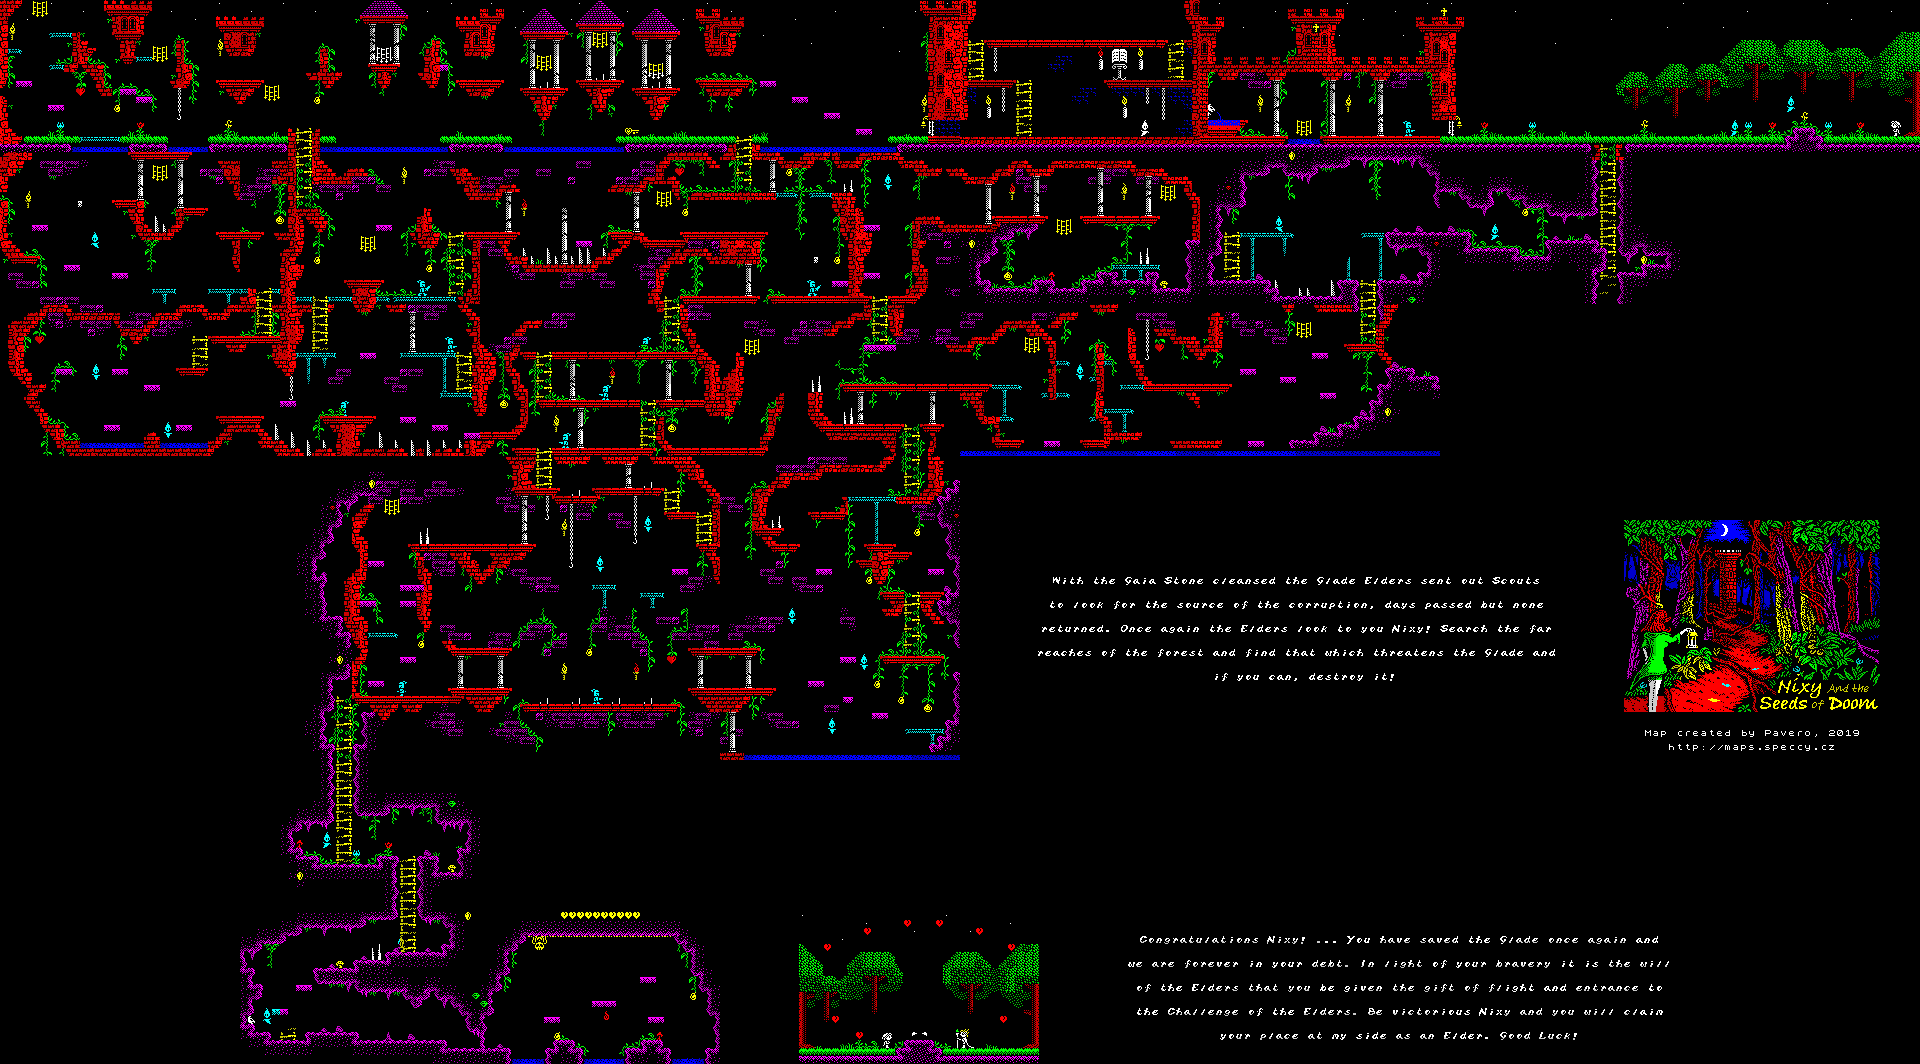 Nixy 2 - The Seeds of Doom - The Map